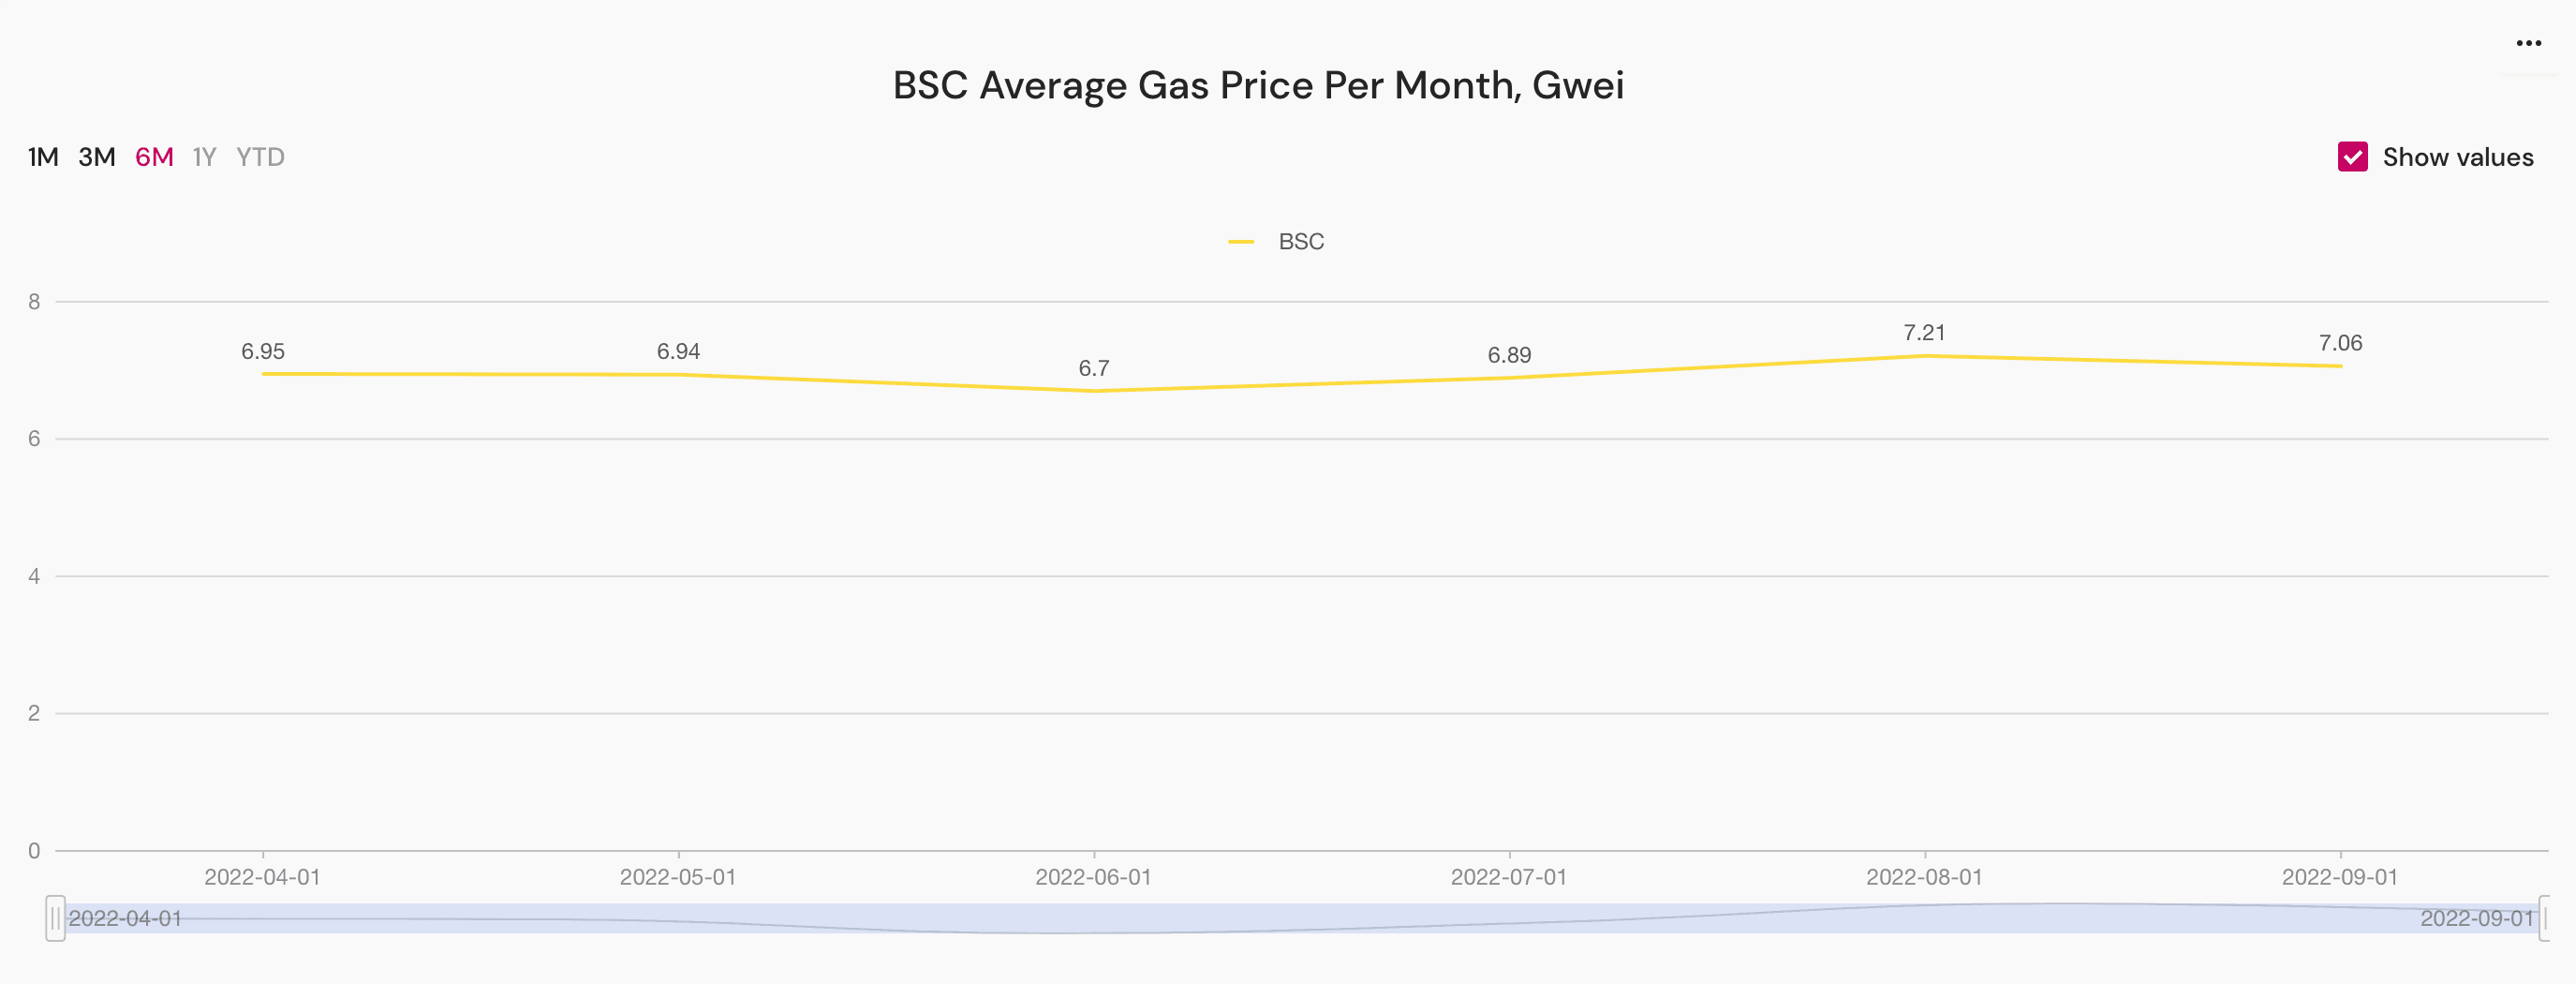 BSC average gas price per month